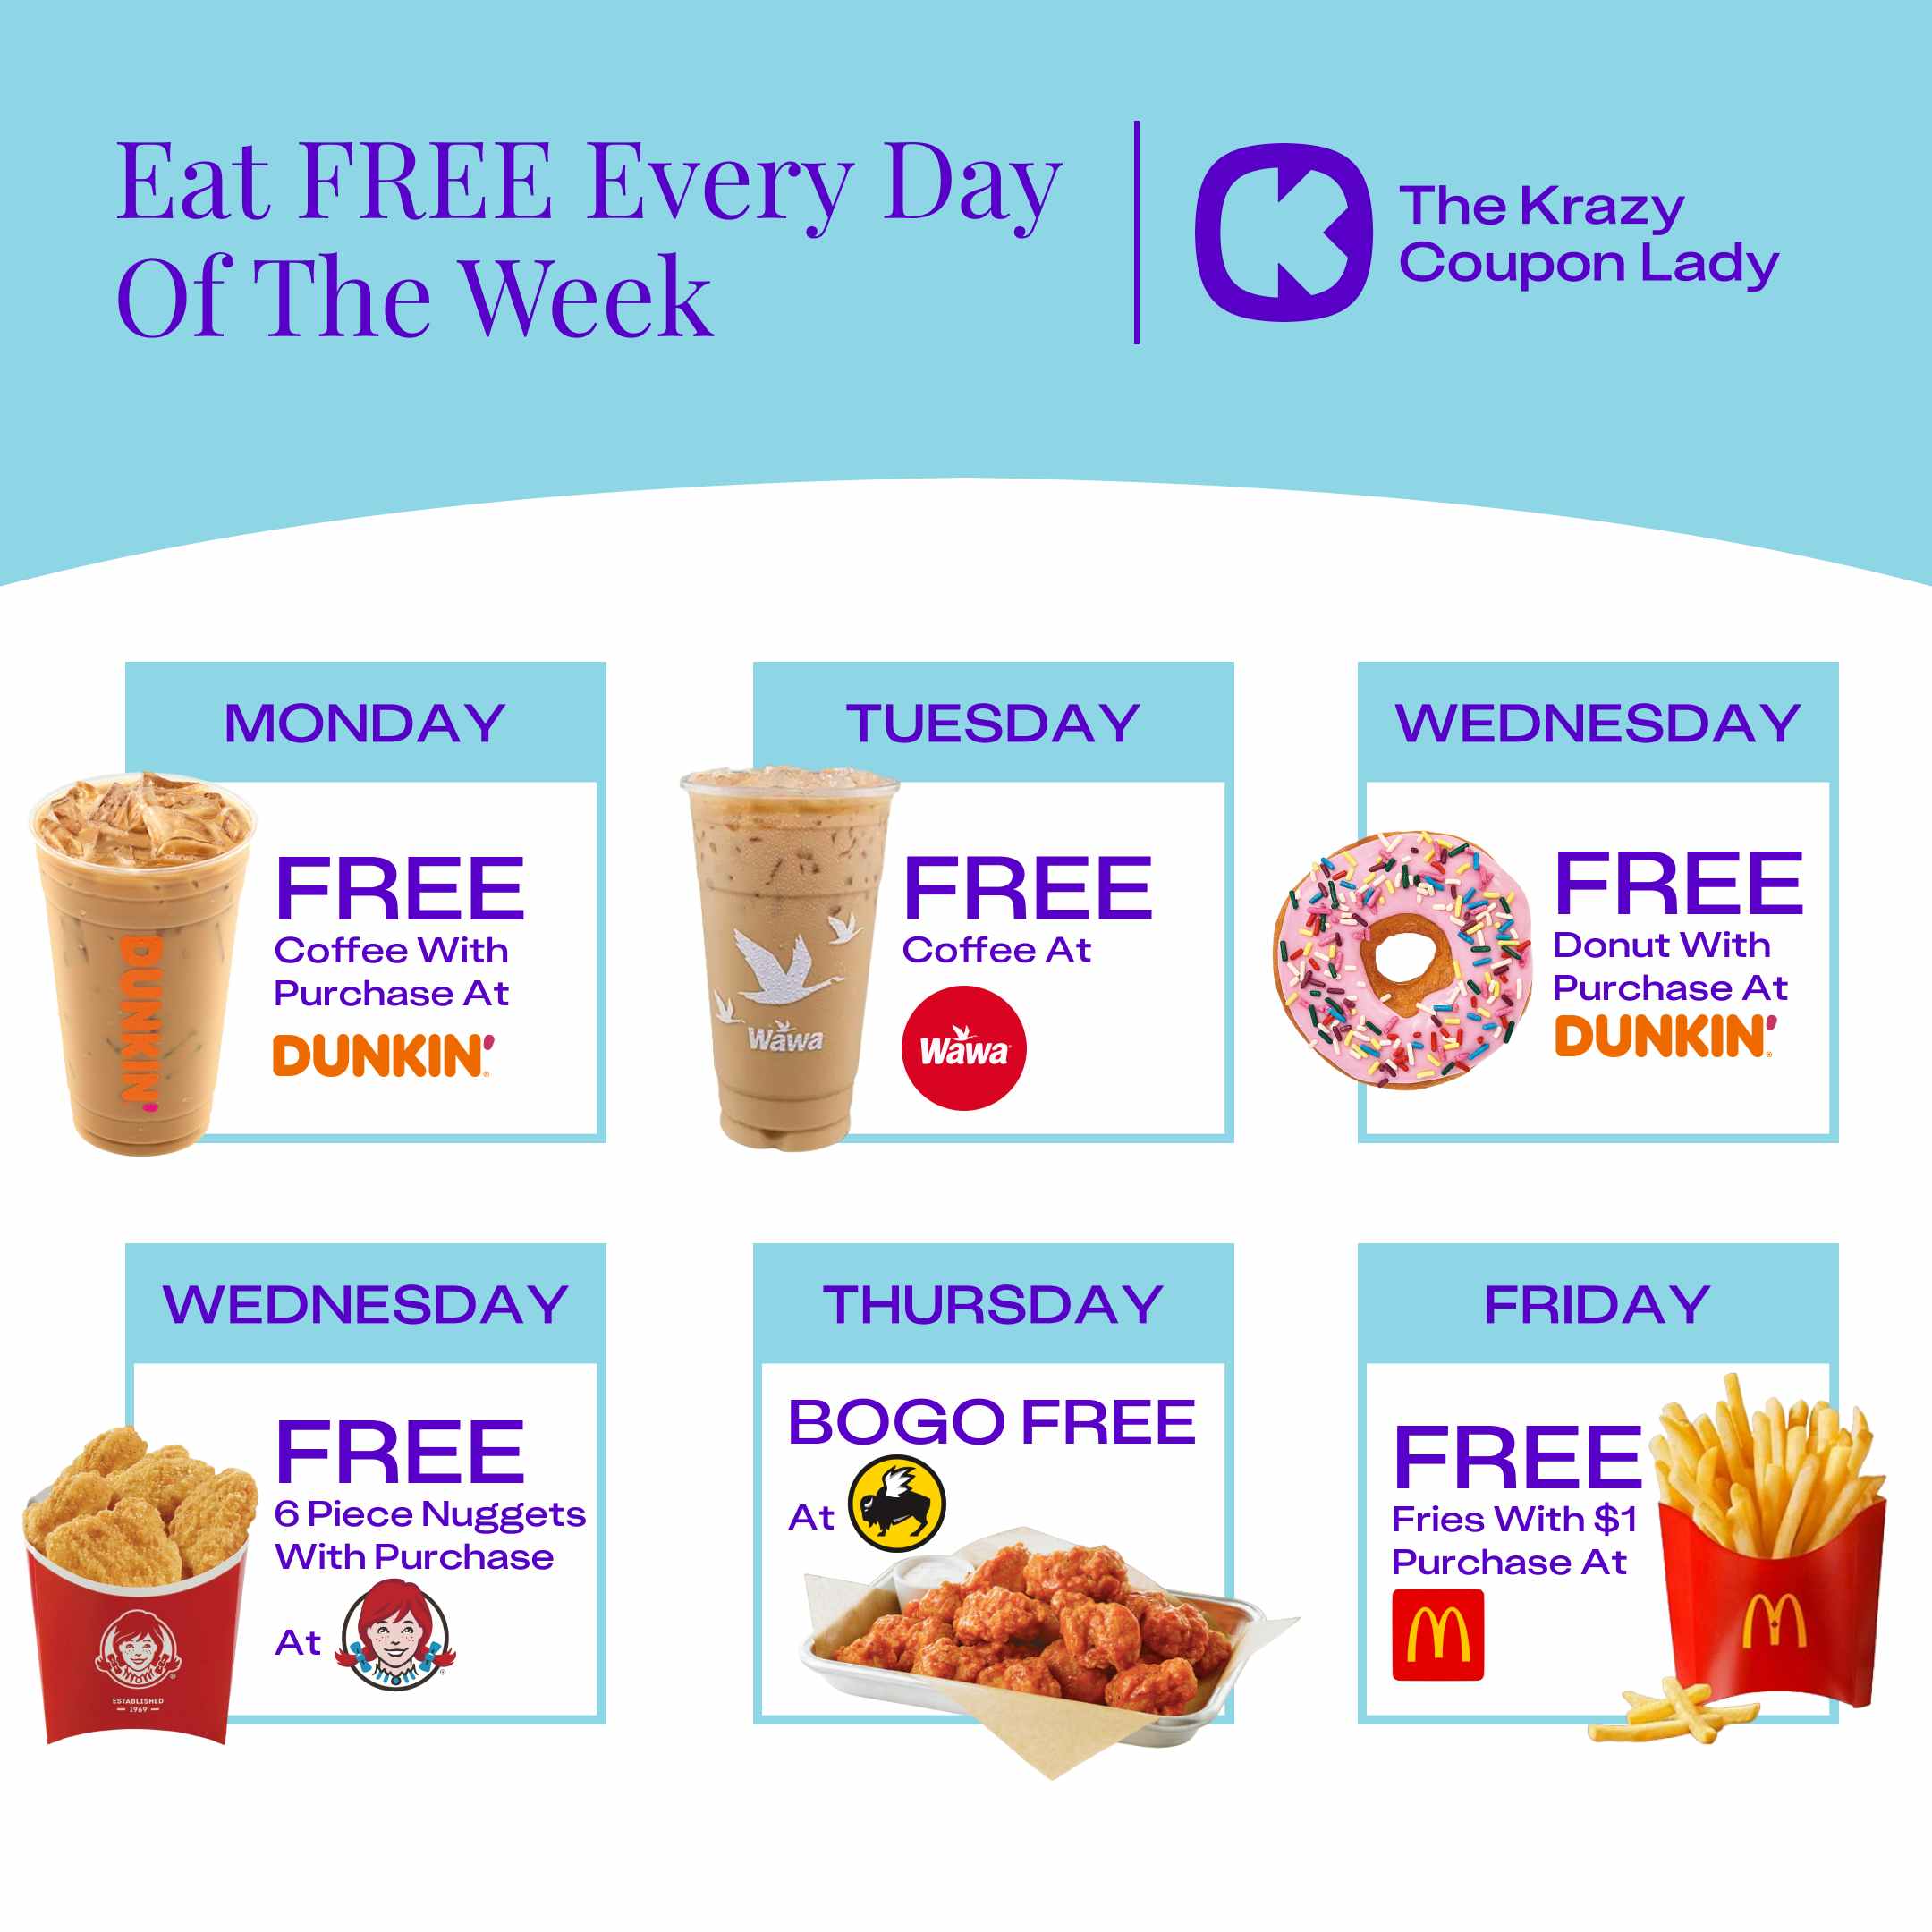 https://prod-cdn-thekrazycouponlady.imgix.net/wp-content/uploads/2023/01/food-deals-monday-tuesday-wednesday-thursday-friday-eat-for-free-every-day-of-the-week-1699892297-1699892297.png?auto=format&fit=fill&q=25